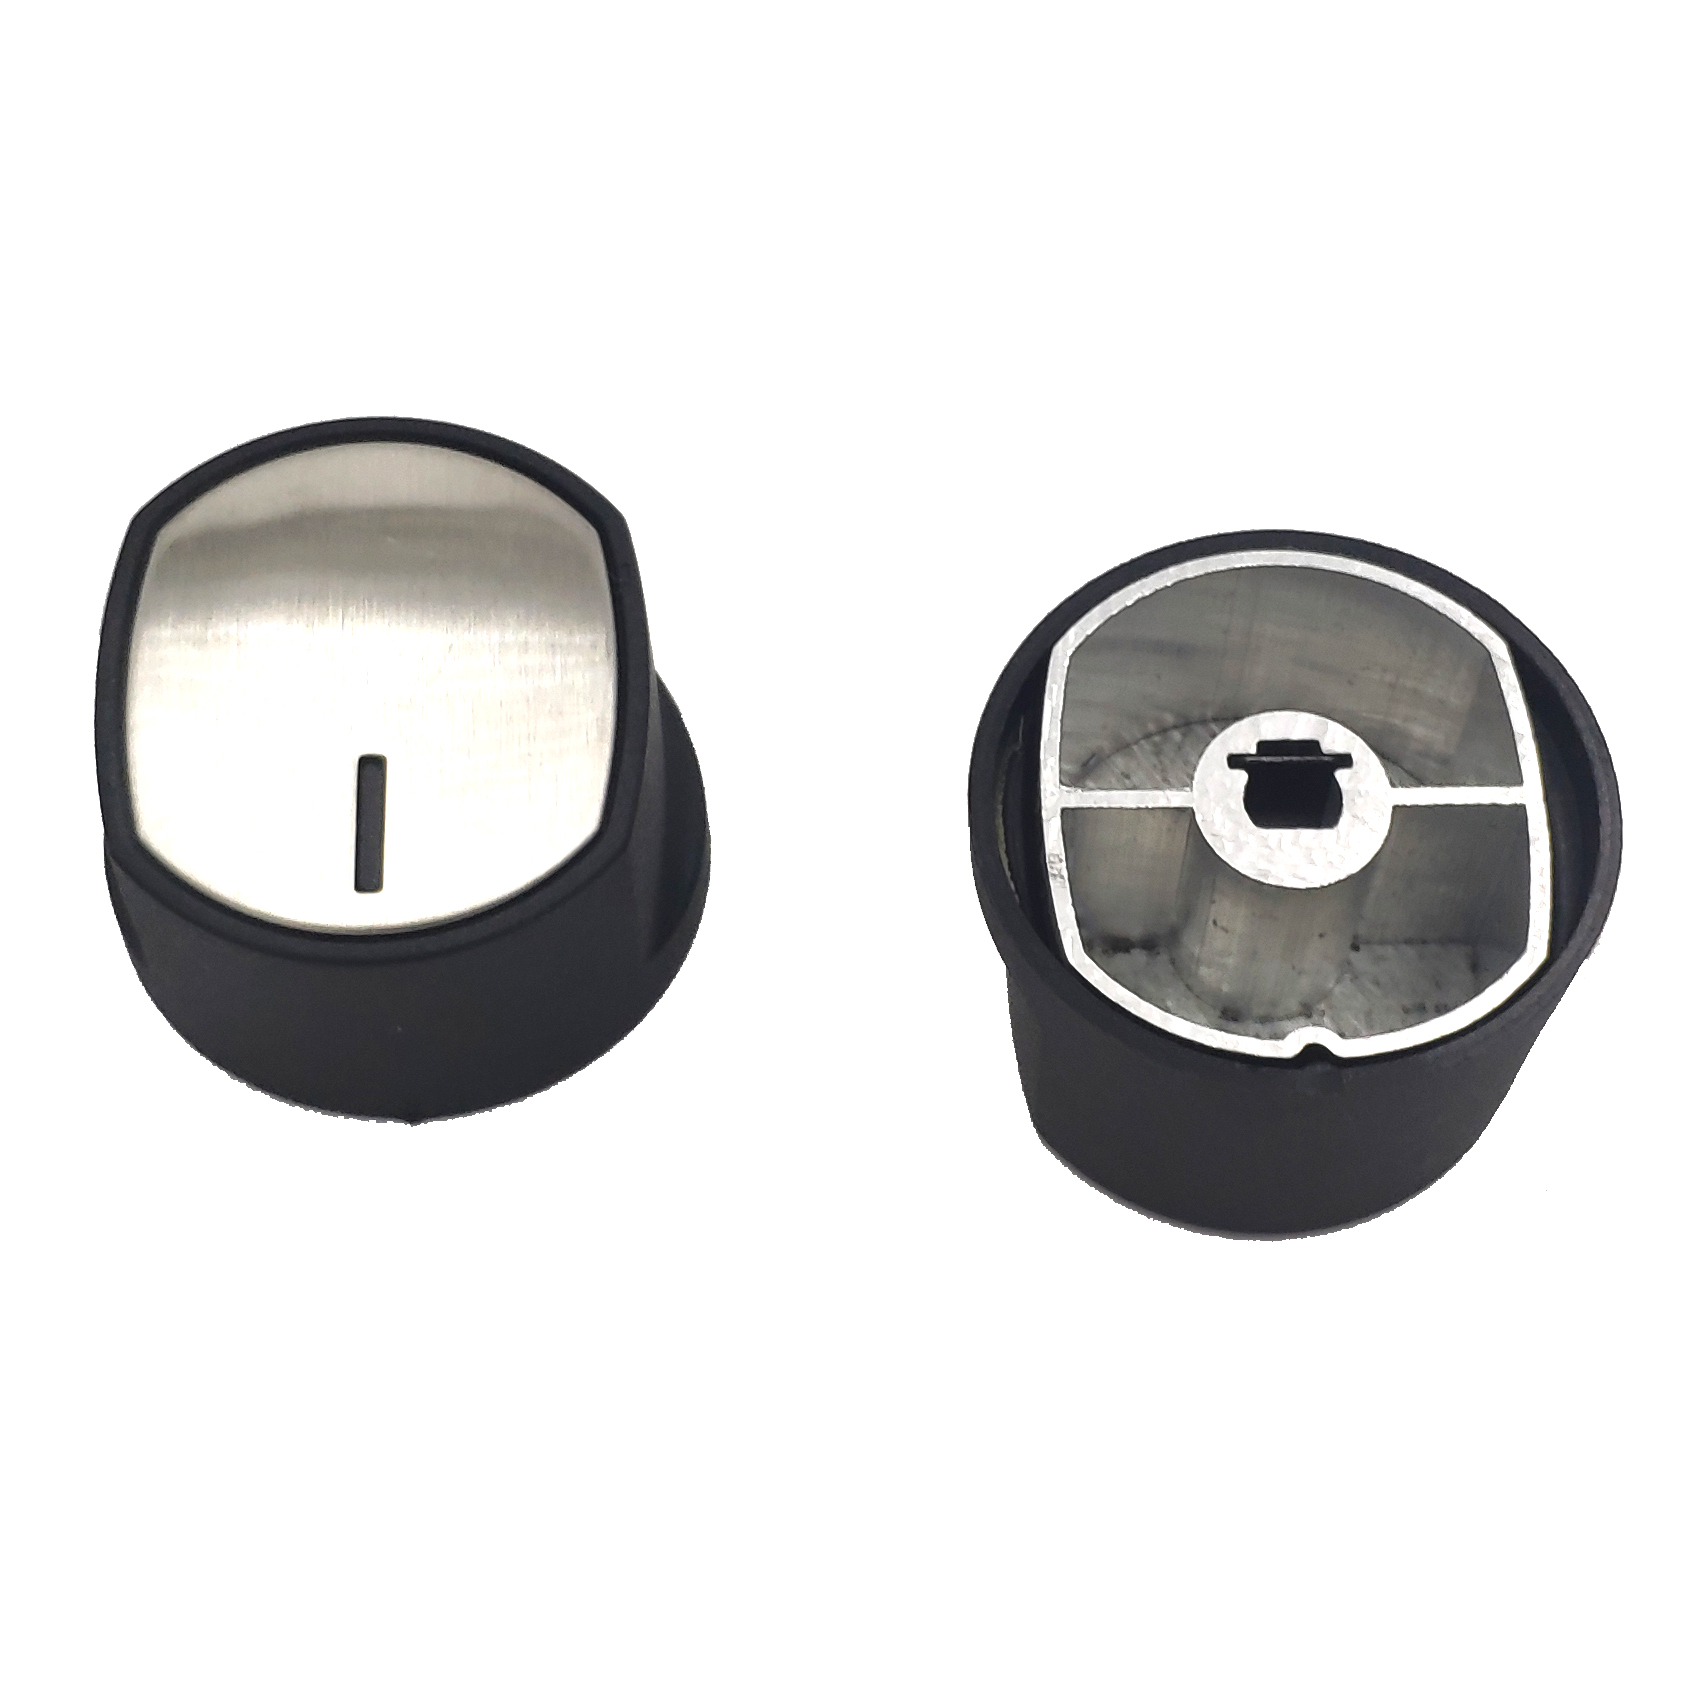 Gas Stove Ignition Button Universal Accessories Metal Switch Knob